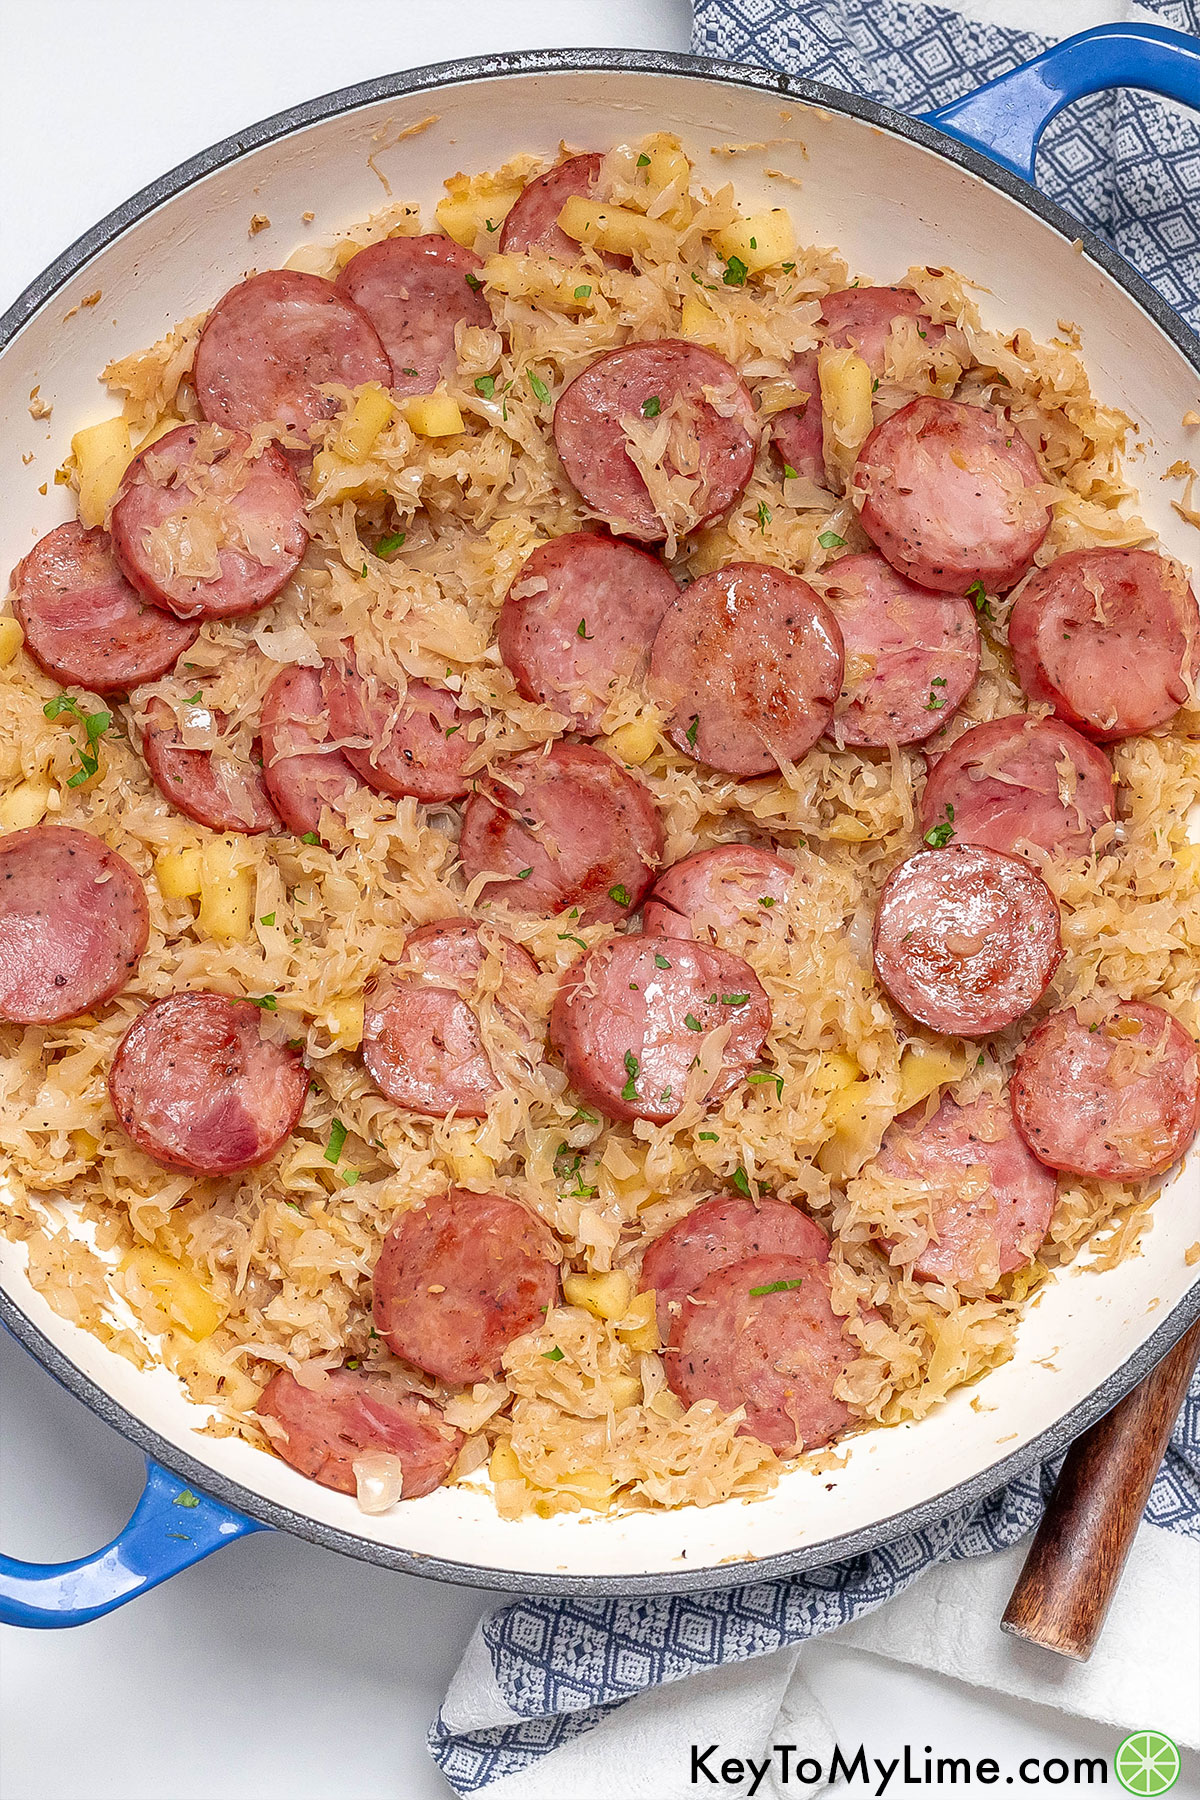 An overhead image of a large skillet filled with fully cooked kielbasa sausage and sauerkraut.